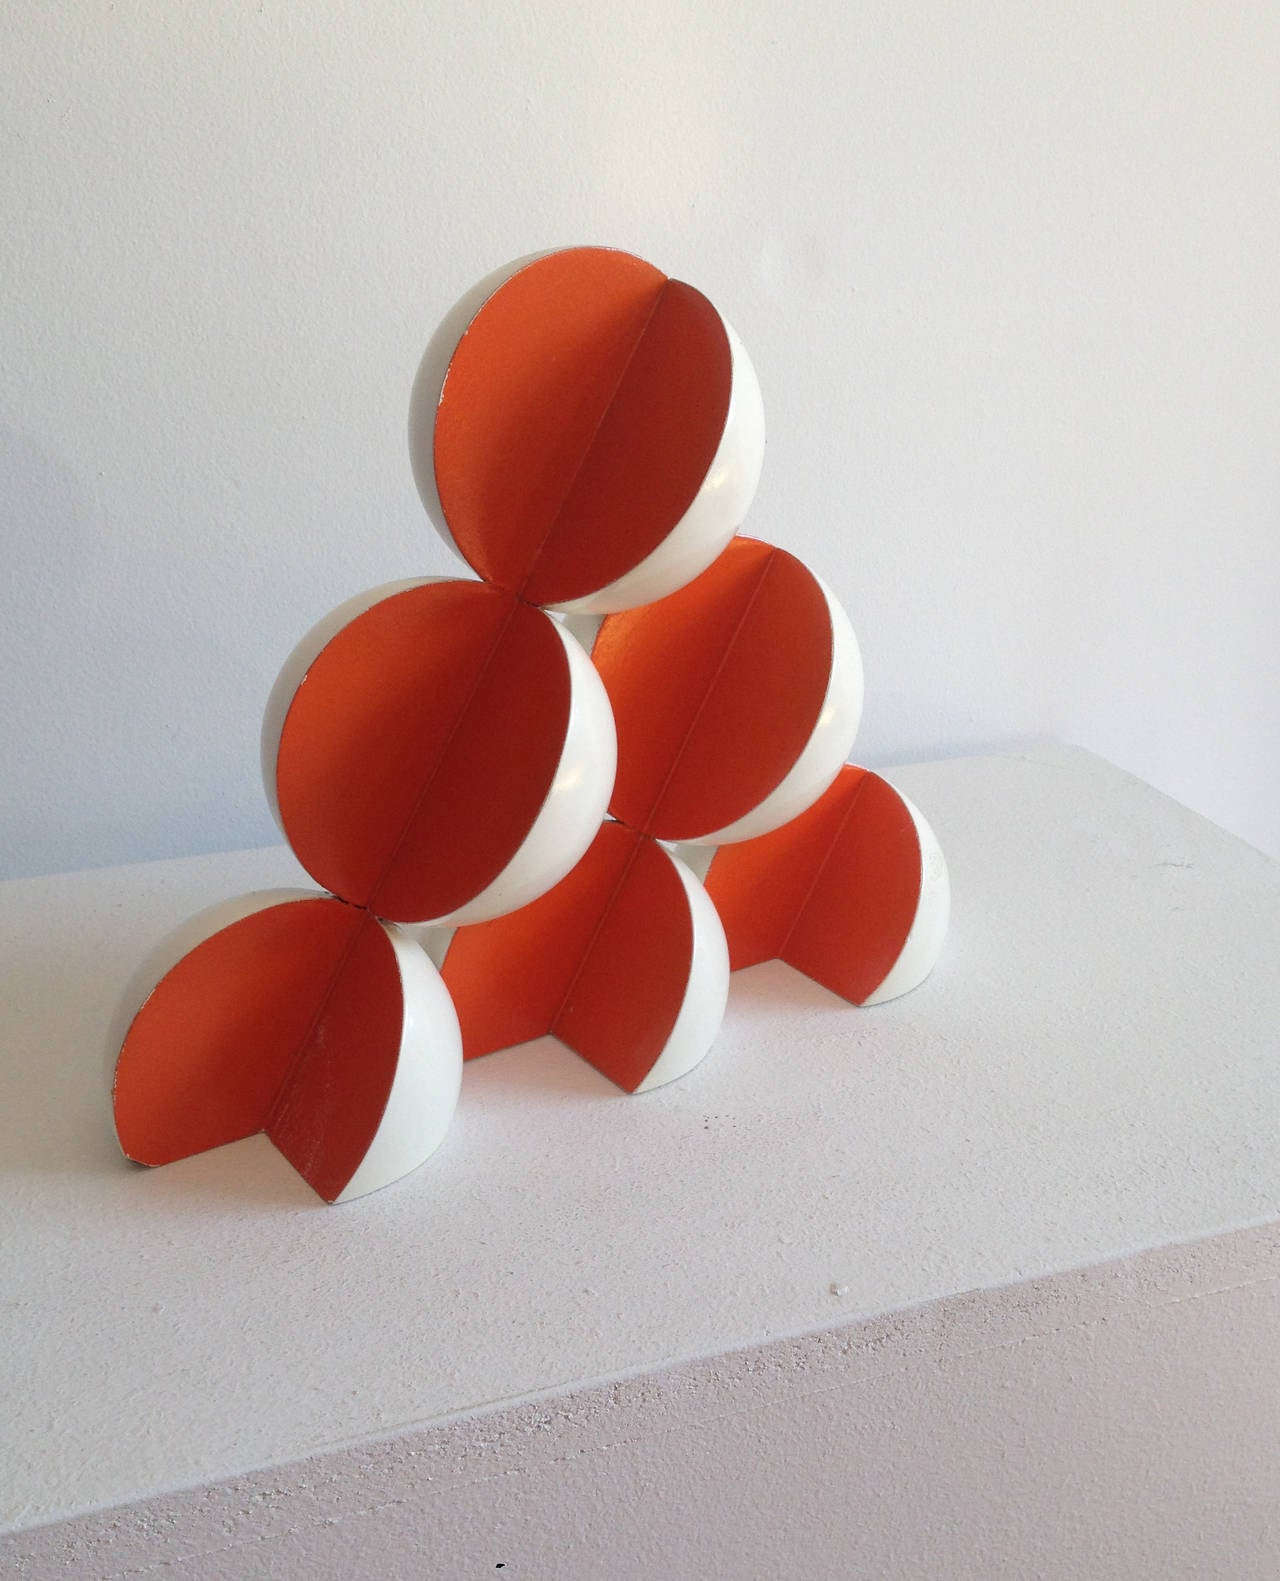 Red & white abstract sculpture in mid century modern style
9 x 11 x 3 inches
painted wood 

This small, contemporary abstract sculpture made of brightly painted wood is perfectly suited for a tabletop, pedestal, or mantle piece. Curved pieces of red